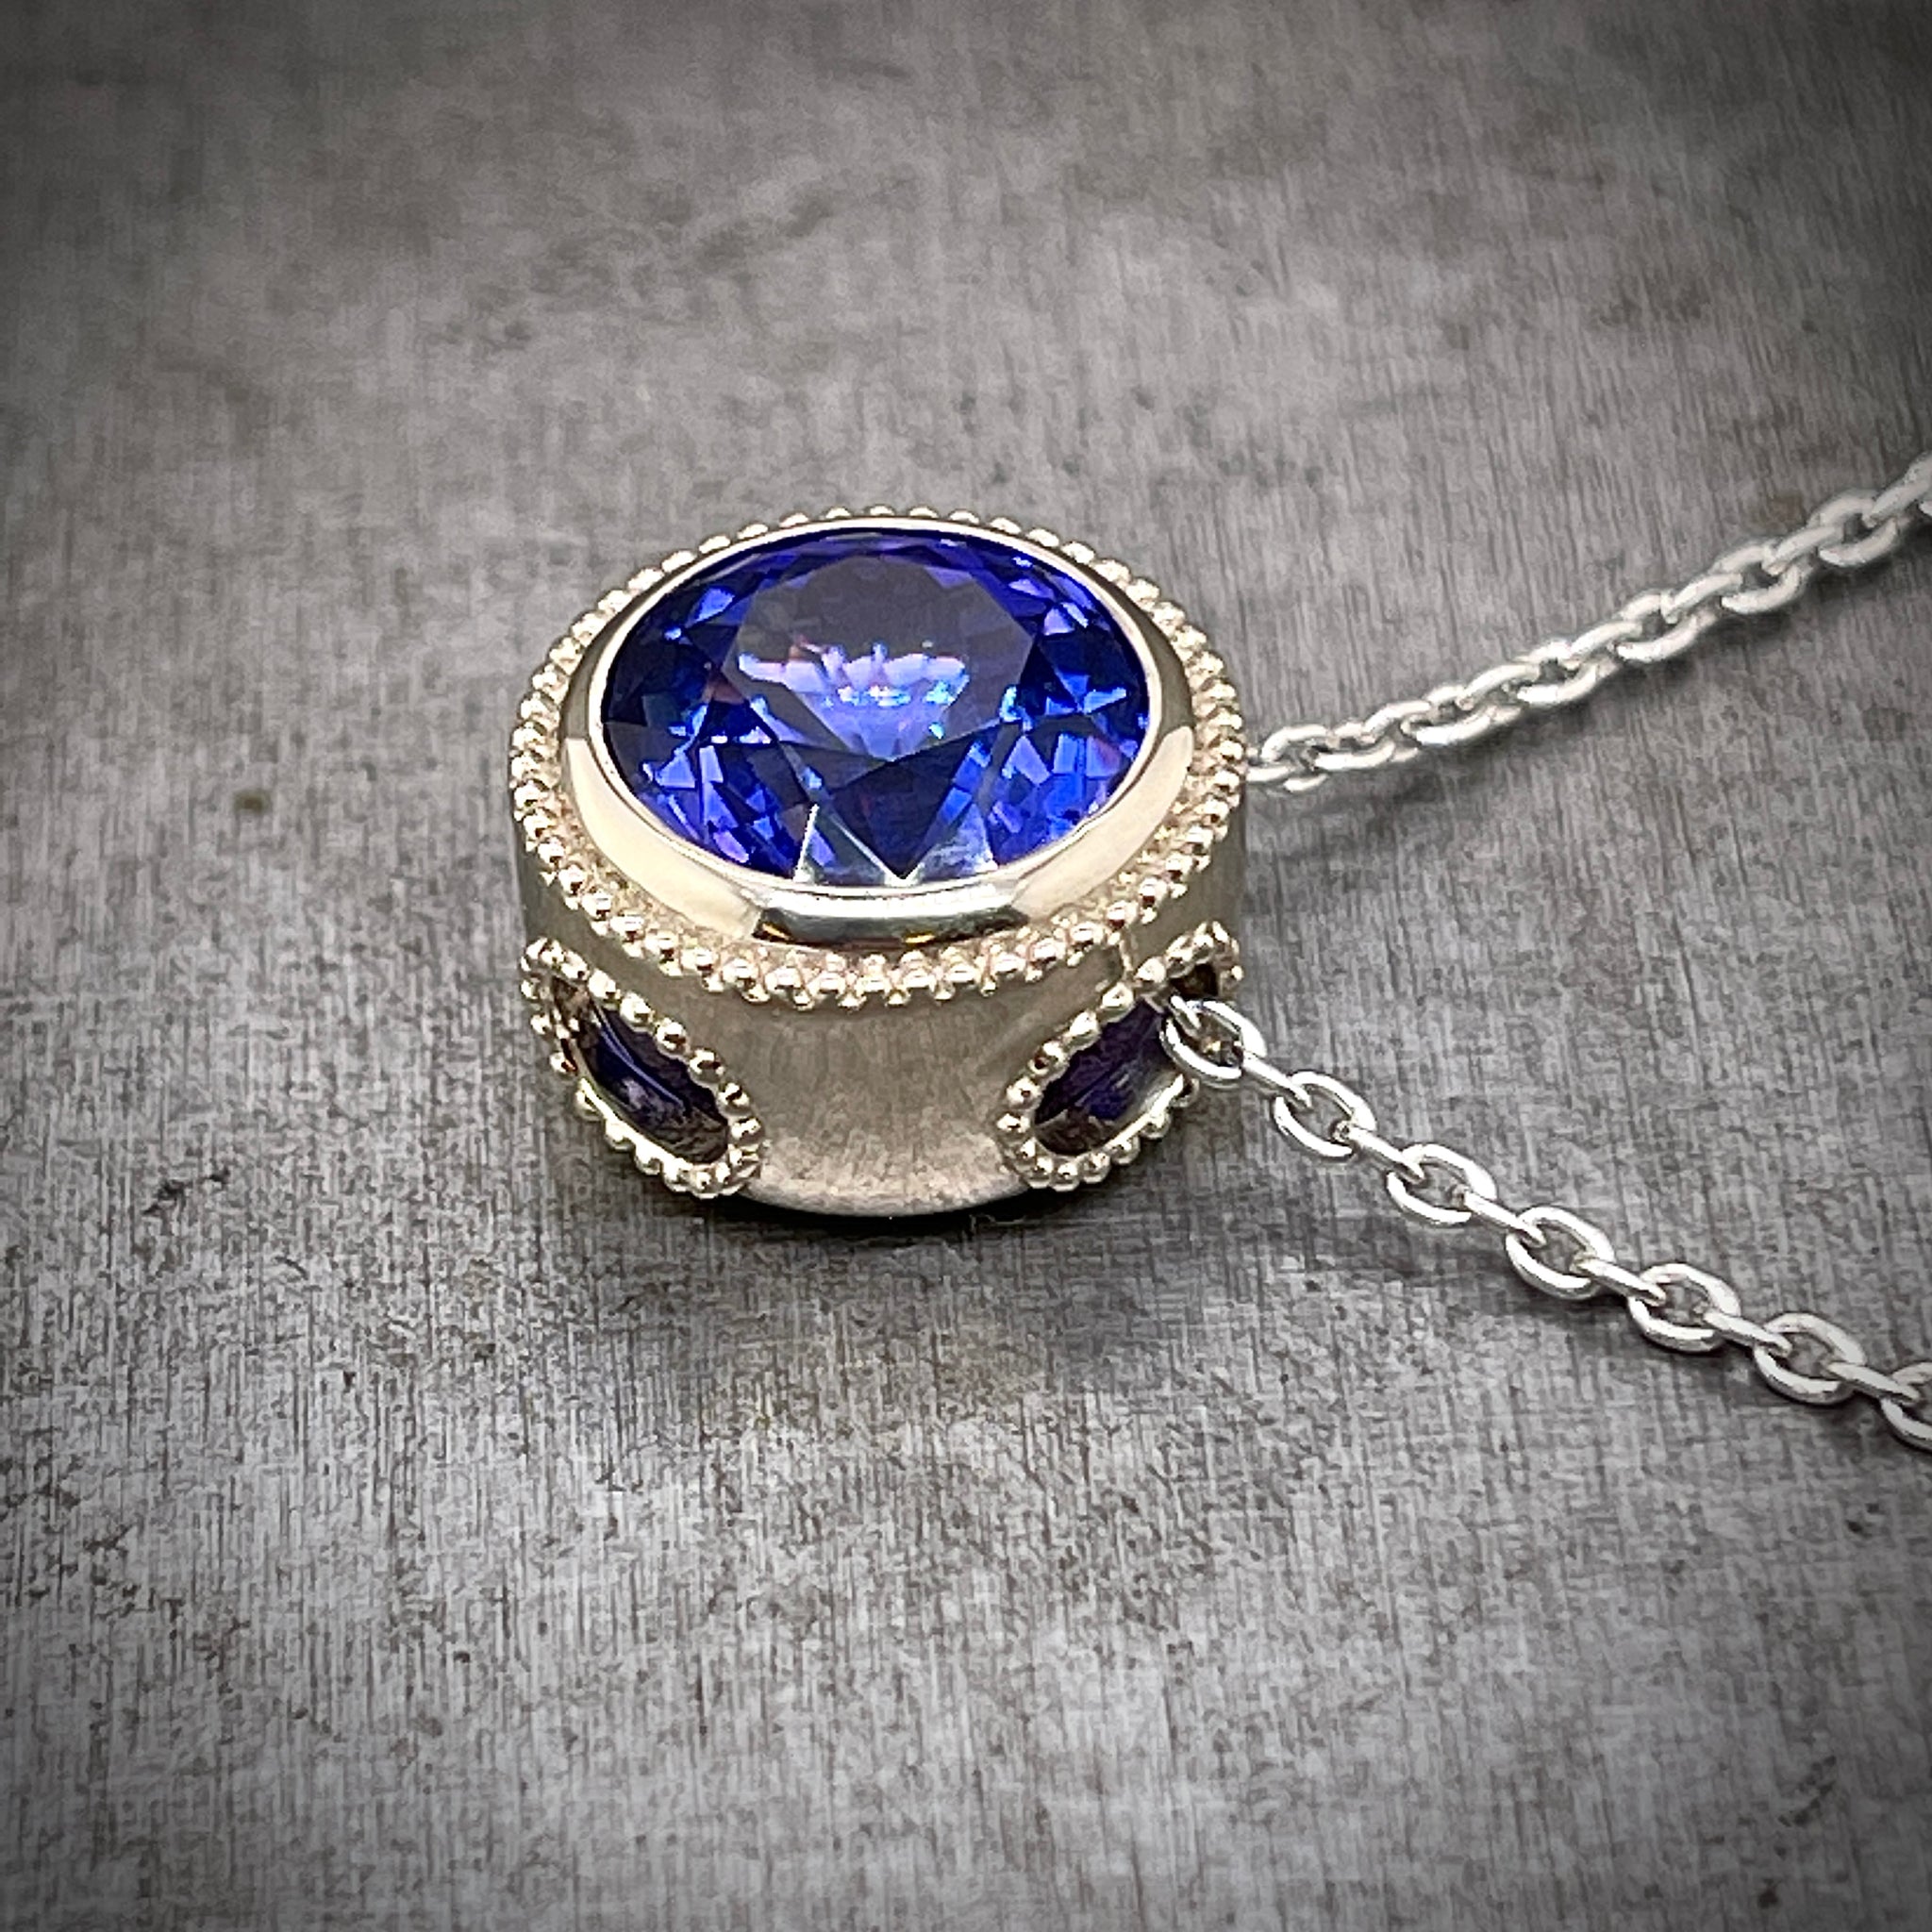 Side View 14K White Gold Tanzanite Necklace, Showing Two Windows in the Bezel